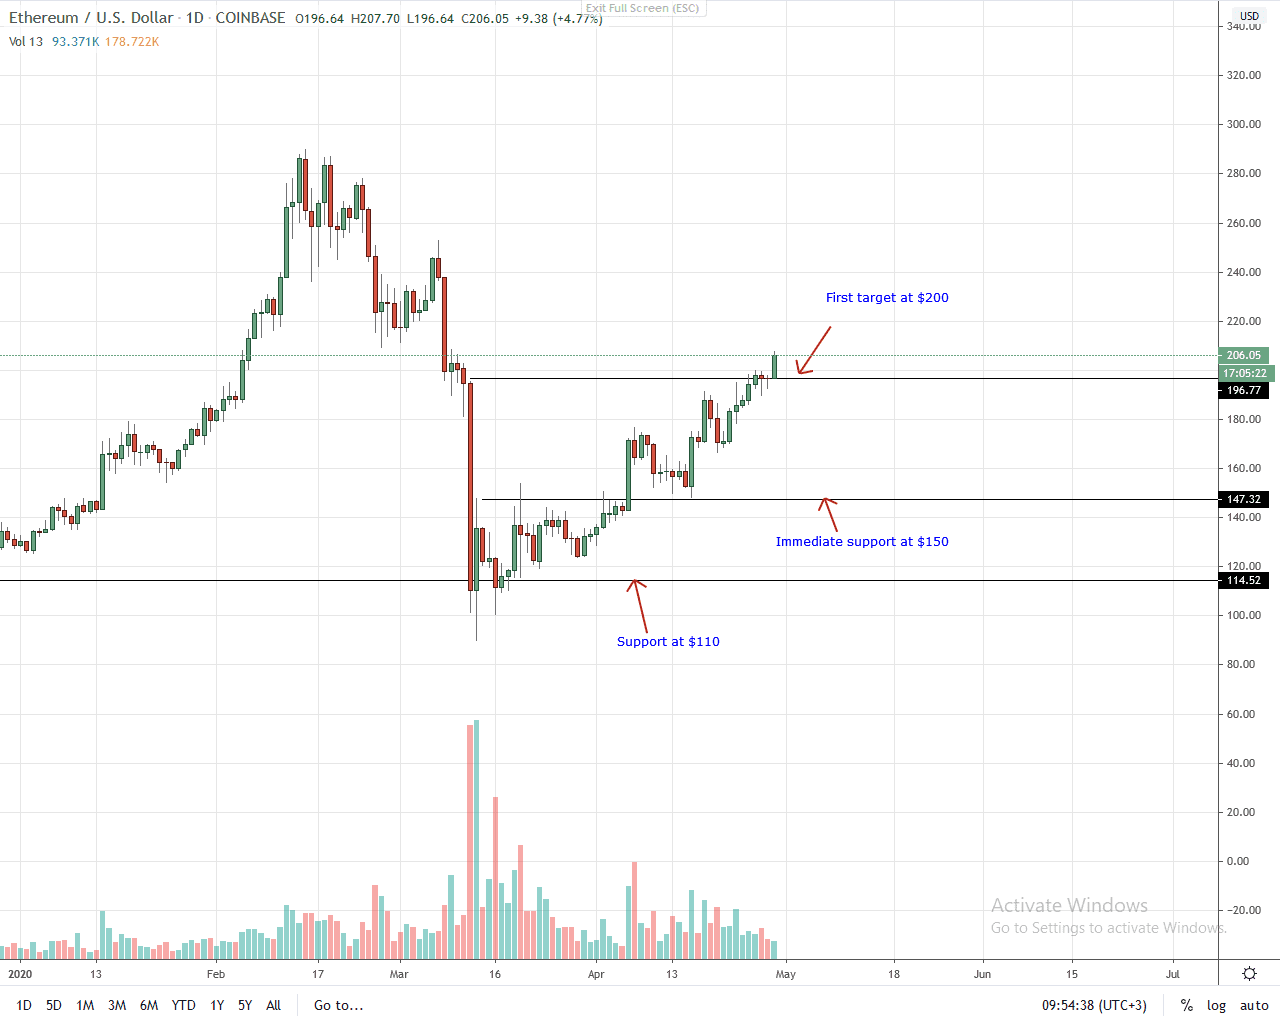 Ethereum Daily Chart for April 29